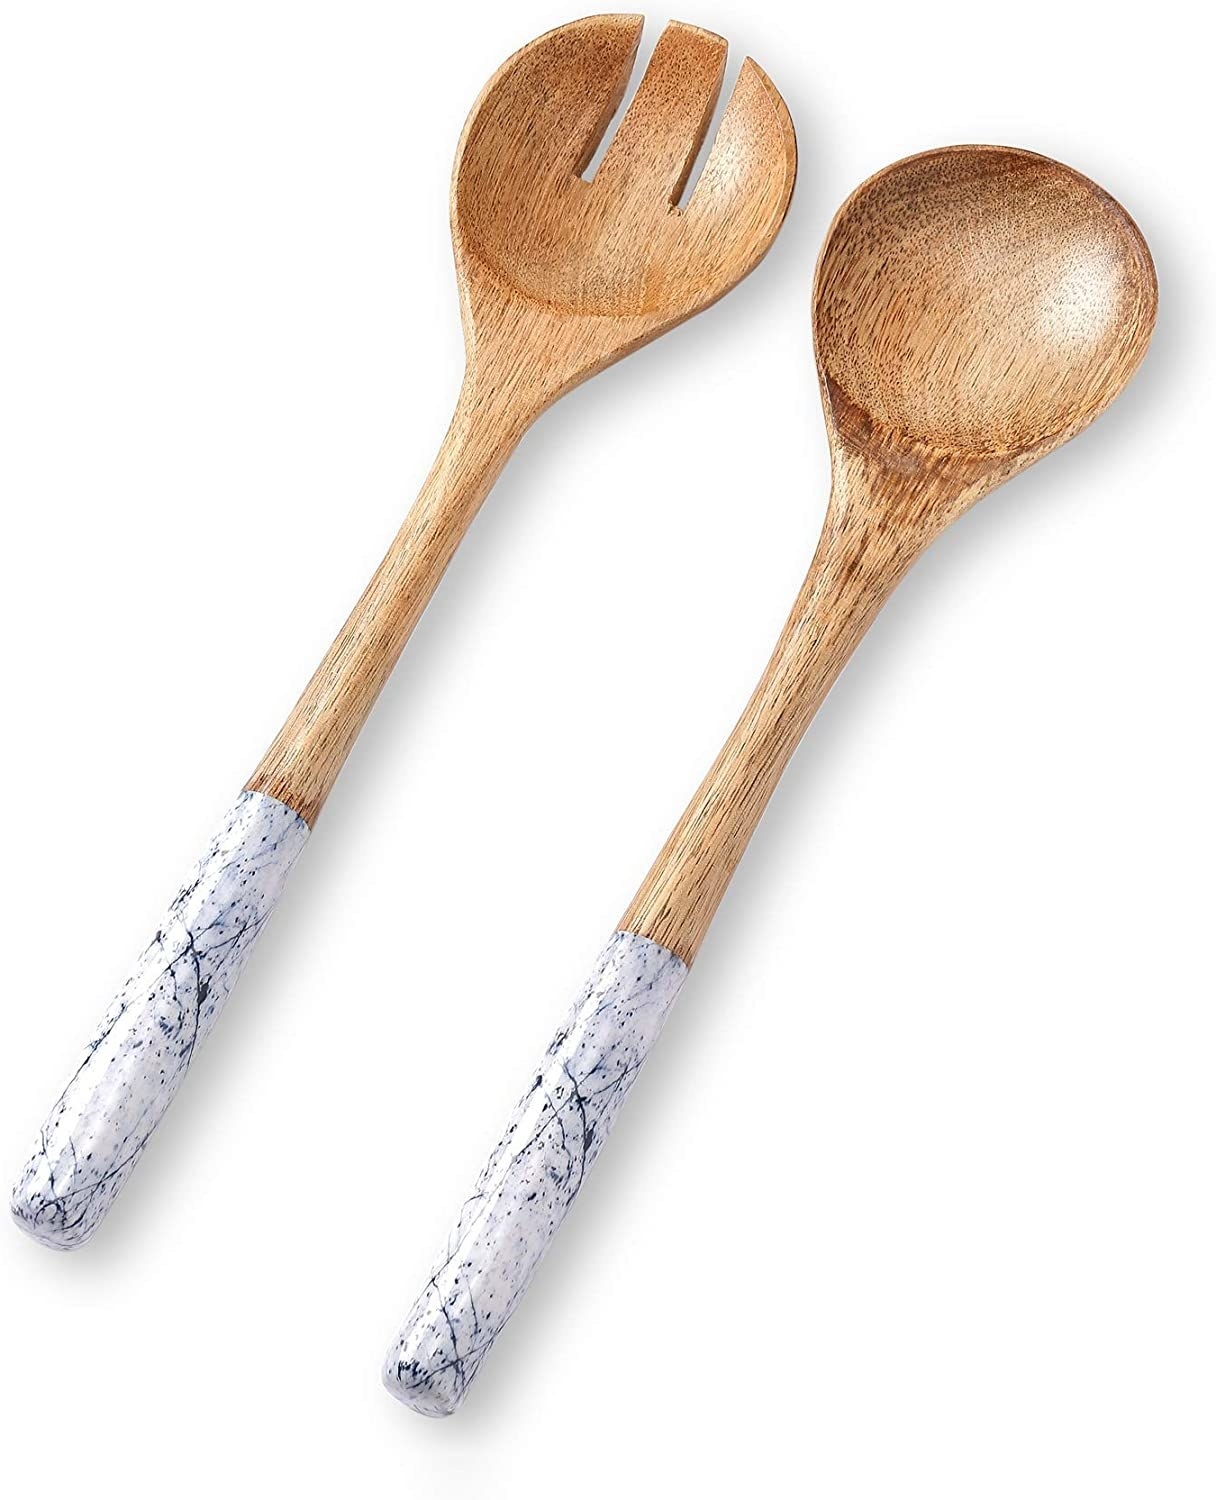 The blue marbled wooden salad servers